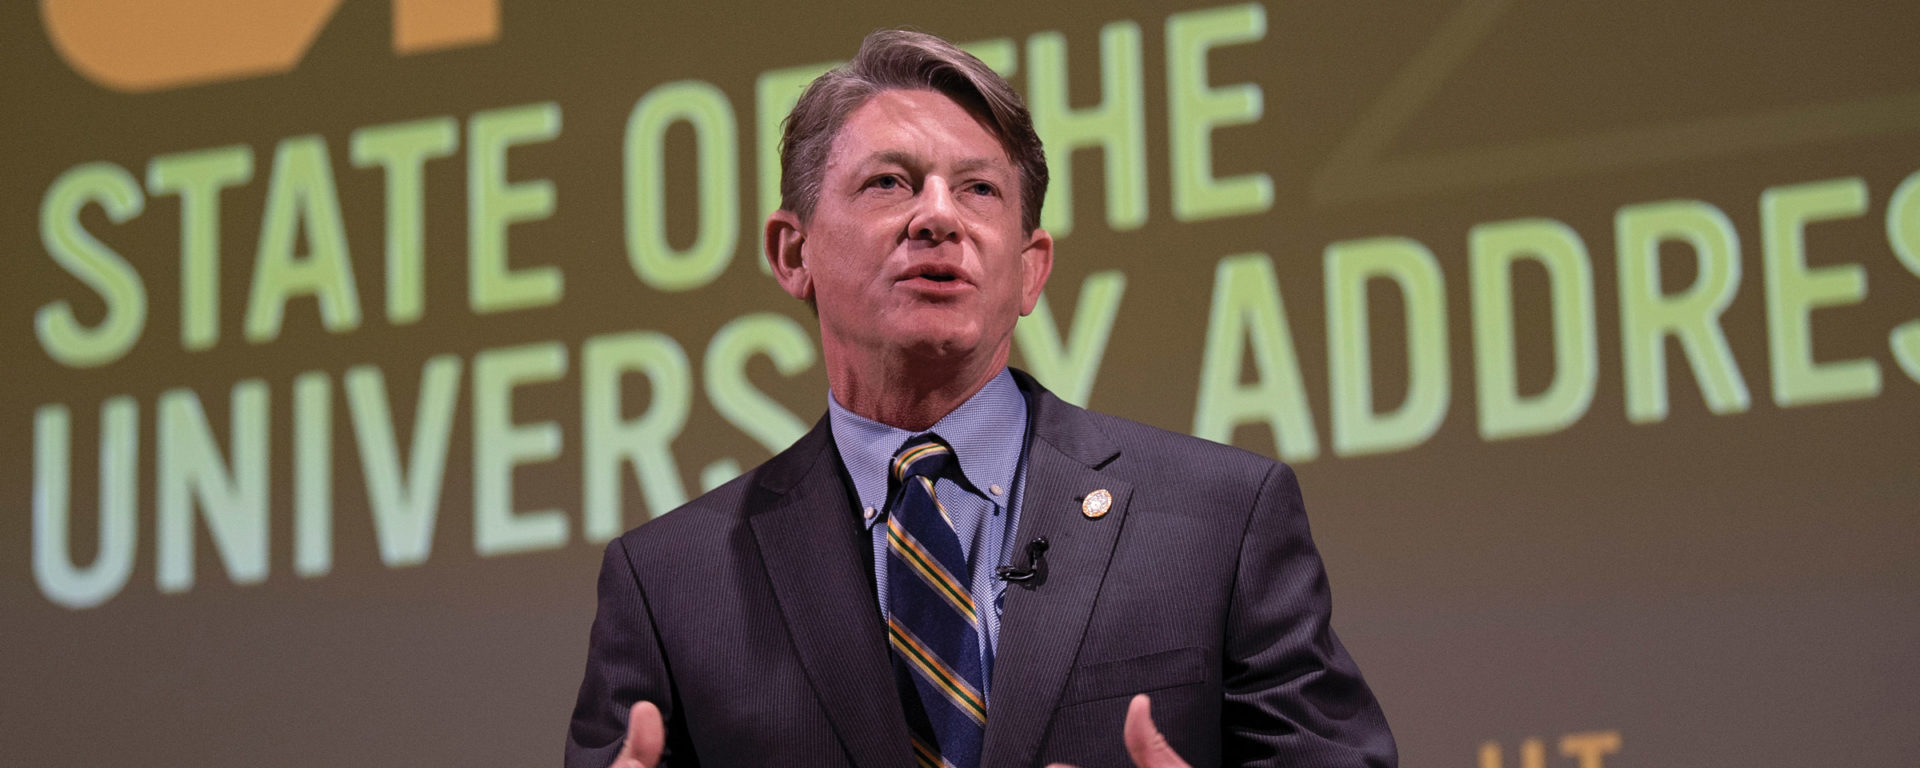 Randy Boyd at the 2019 State of the University Address